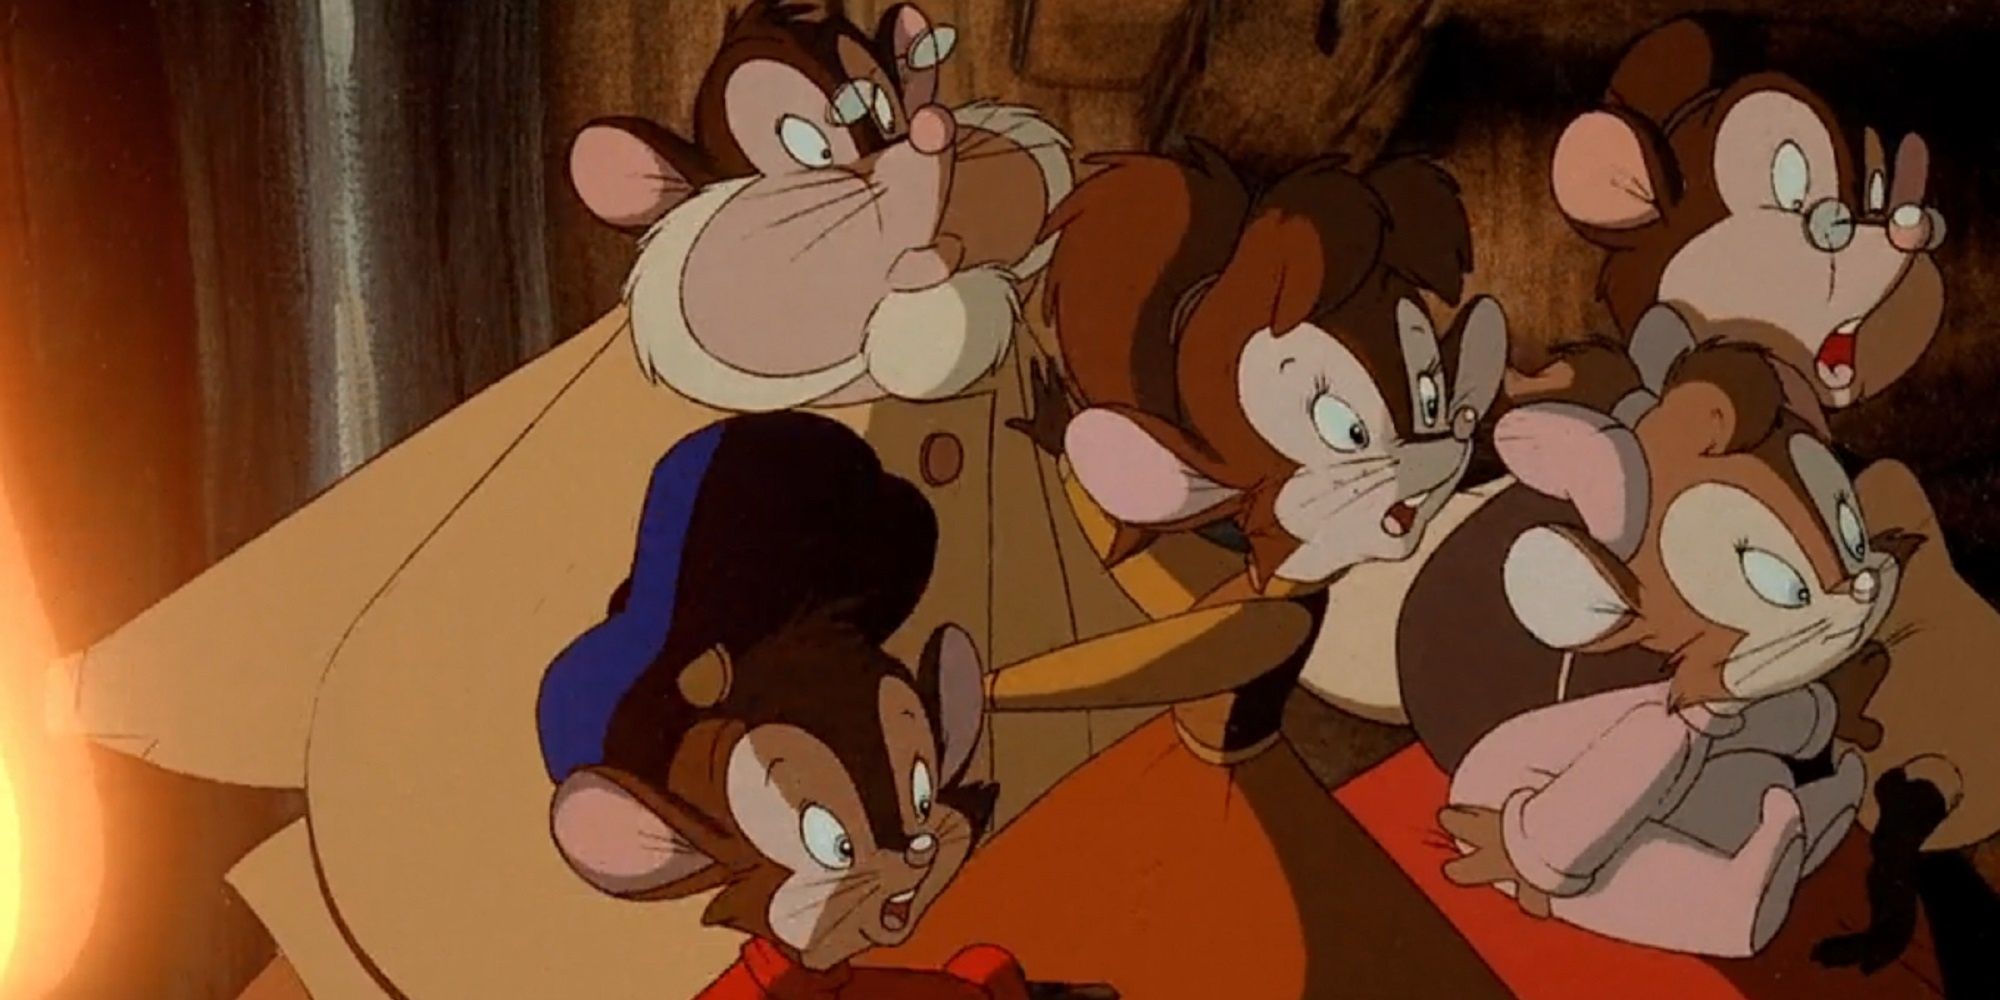 Fievel and his family on the train in An American Tail: Fievel Goes West.